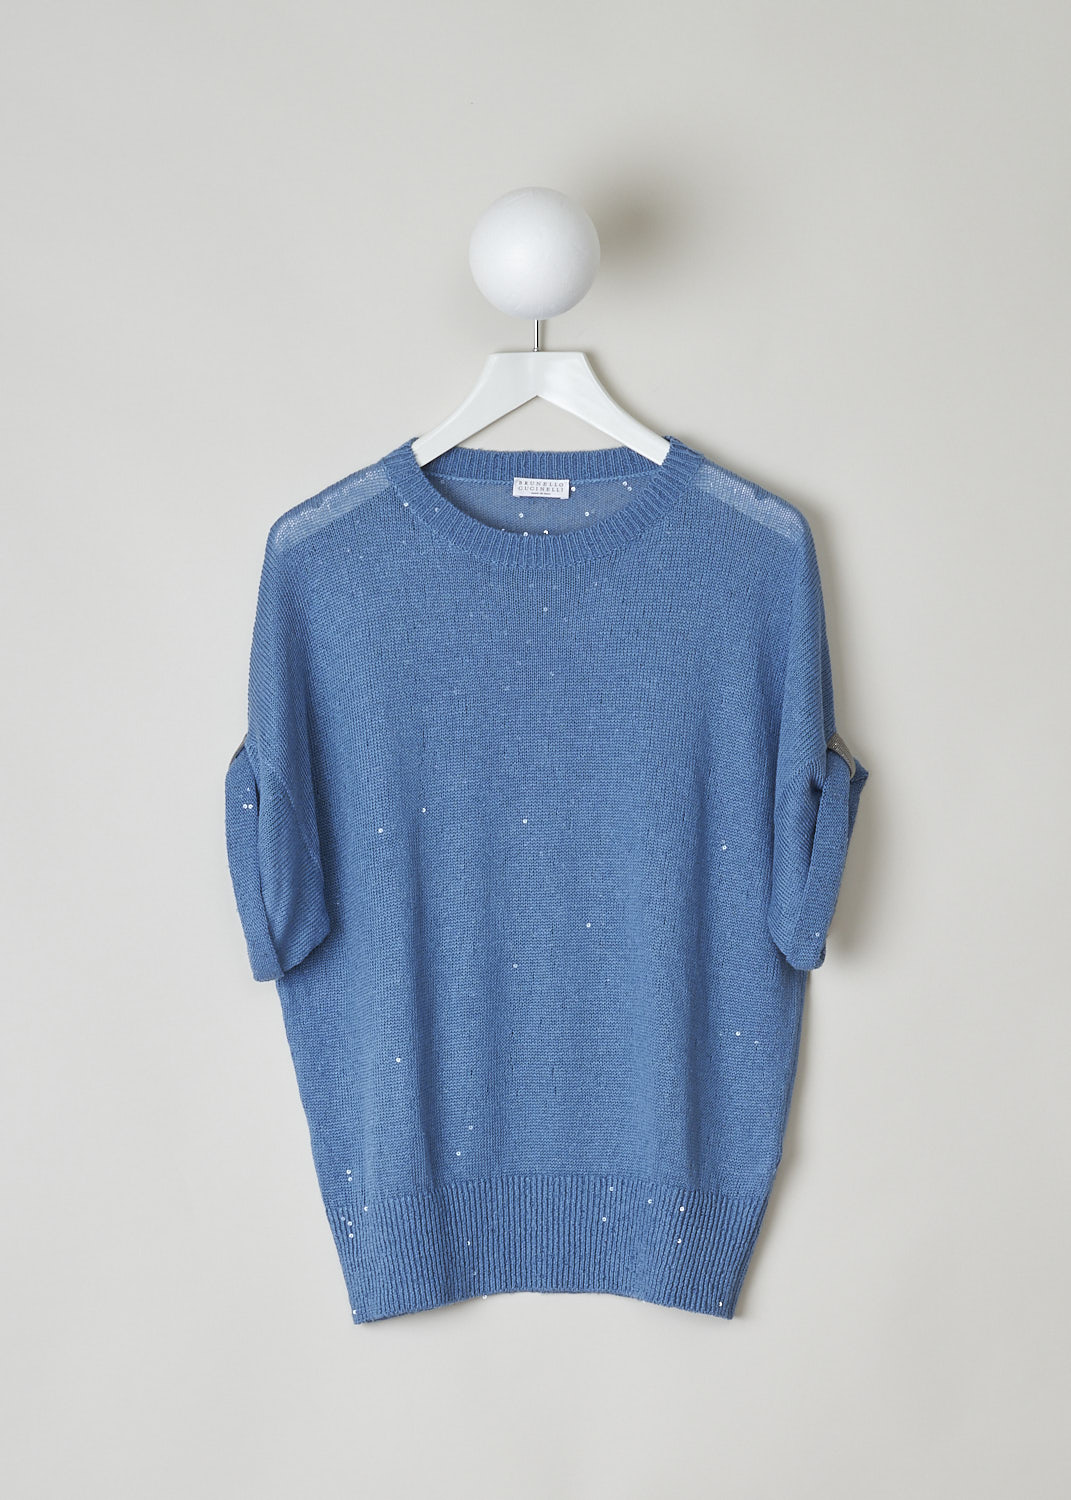 BRUNELLO CUCINELLI, LIGHT BLUE SWEATER WITH SEQUINS, M10552300_C9402, Blue, Front, This short sleeve light blue sweater has sequins sewn-in throughout. The round neckline, cuffs and hemline have a ribbed finish. The short sleeves are folded and held in place with a monilli decorated strap.
